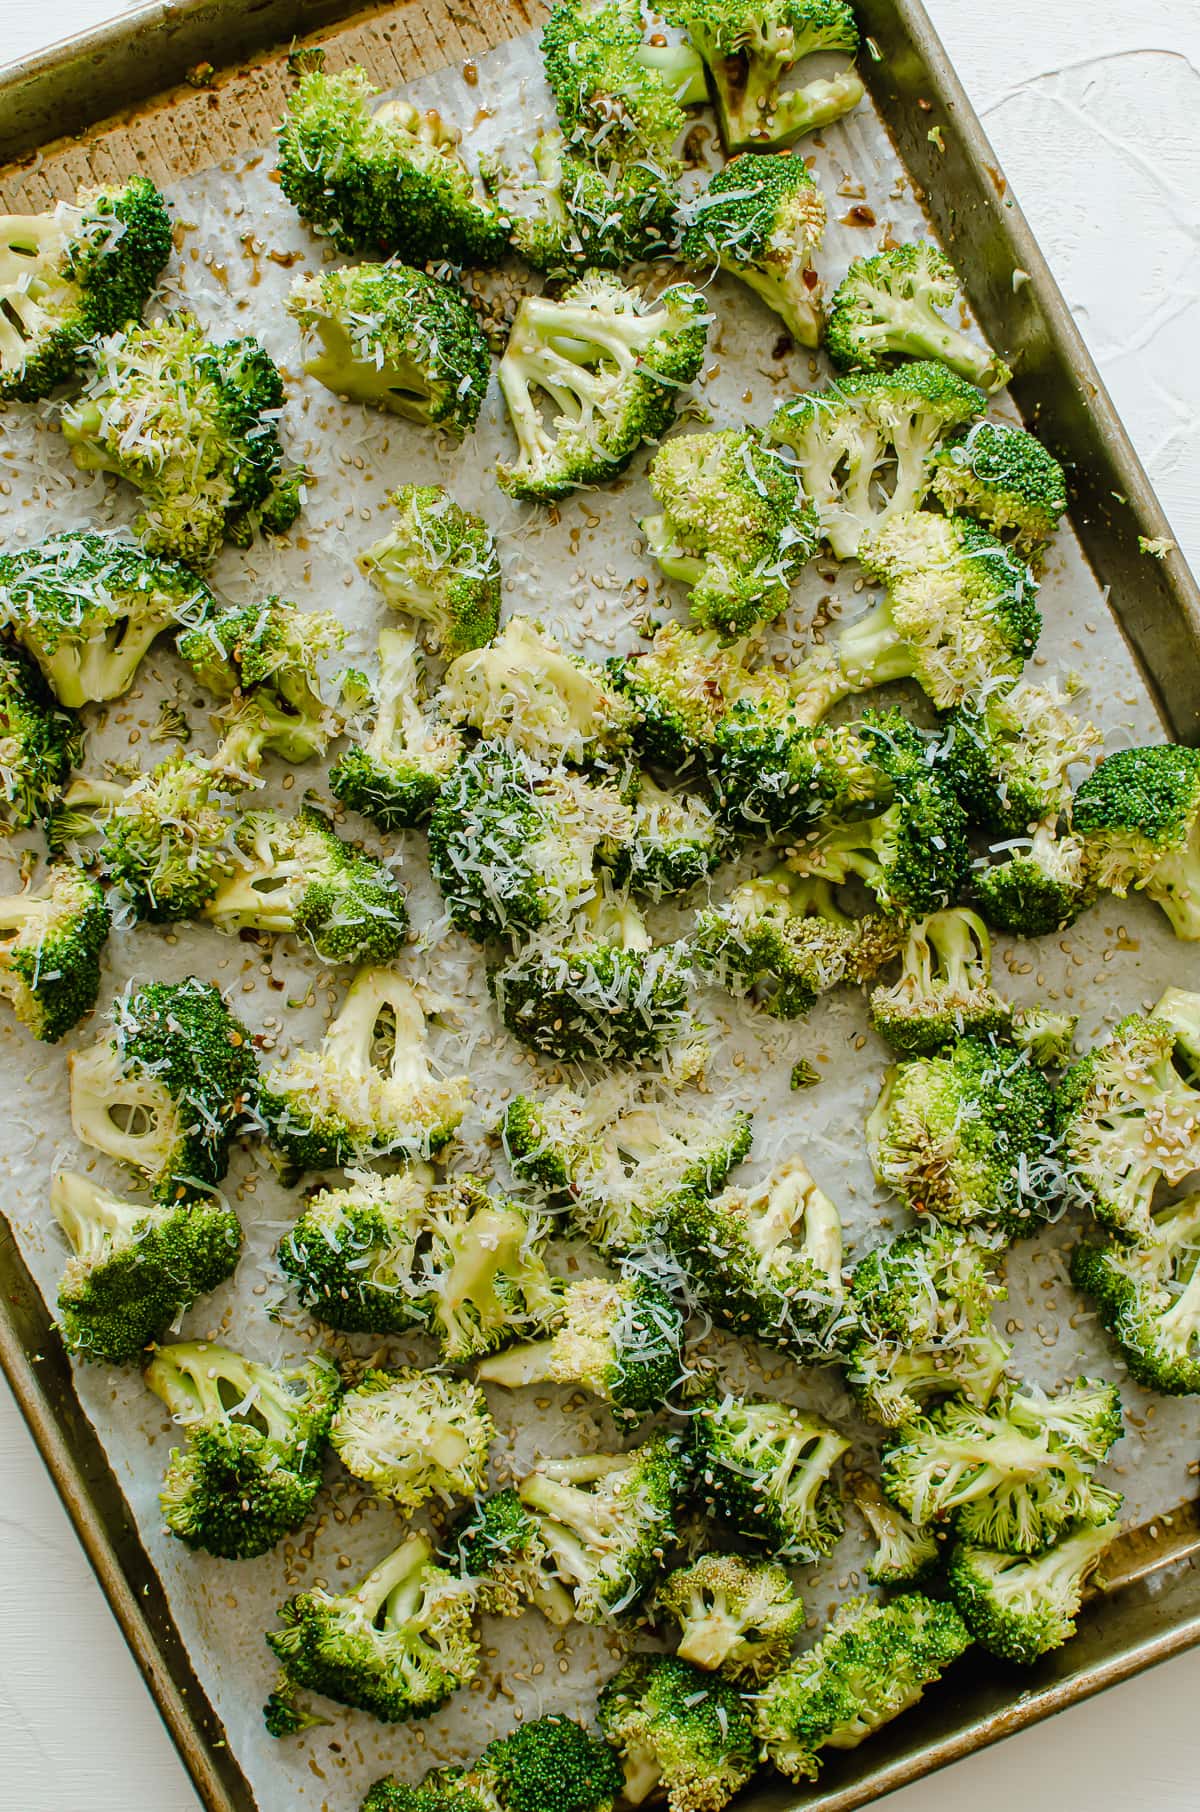 Uncooked broccoli on a sheet pan topped with Parmesan cheese.